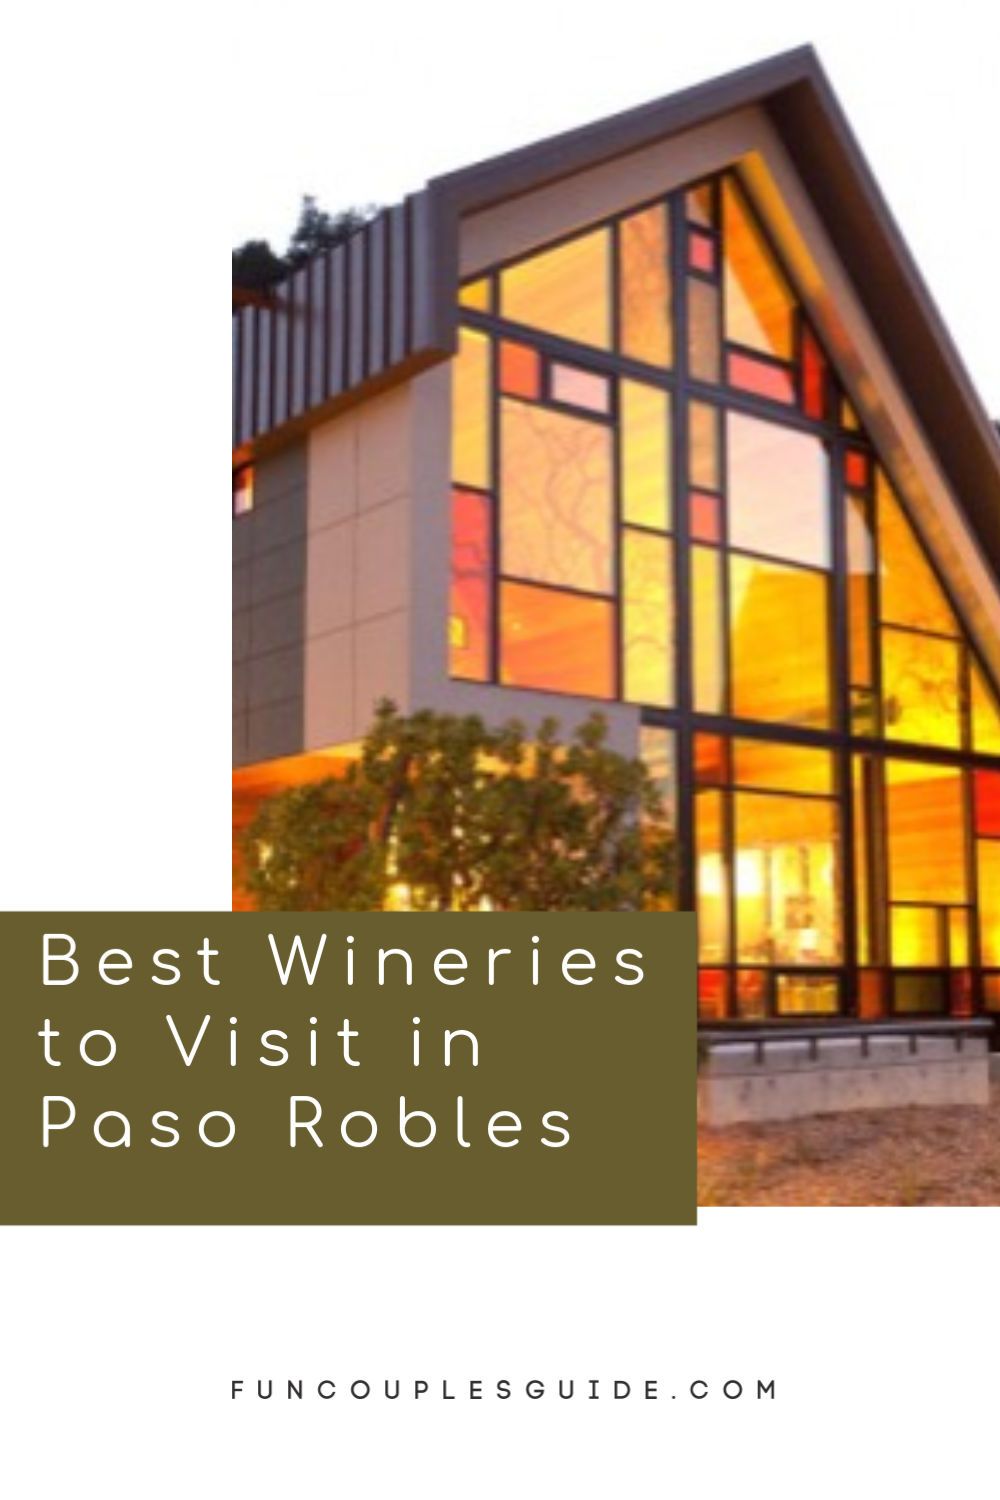 Best Wineries to Visit in Paso Robles